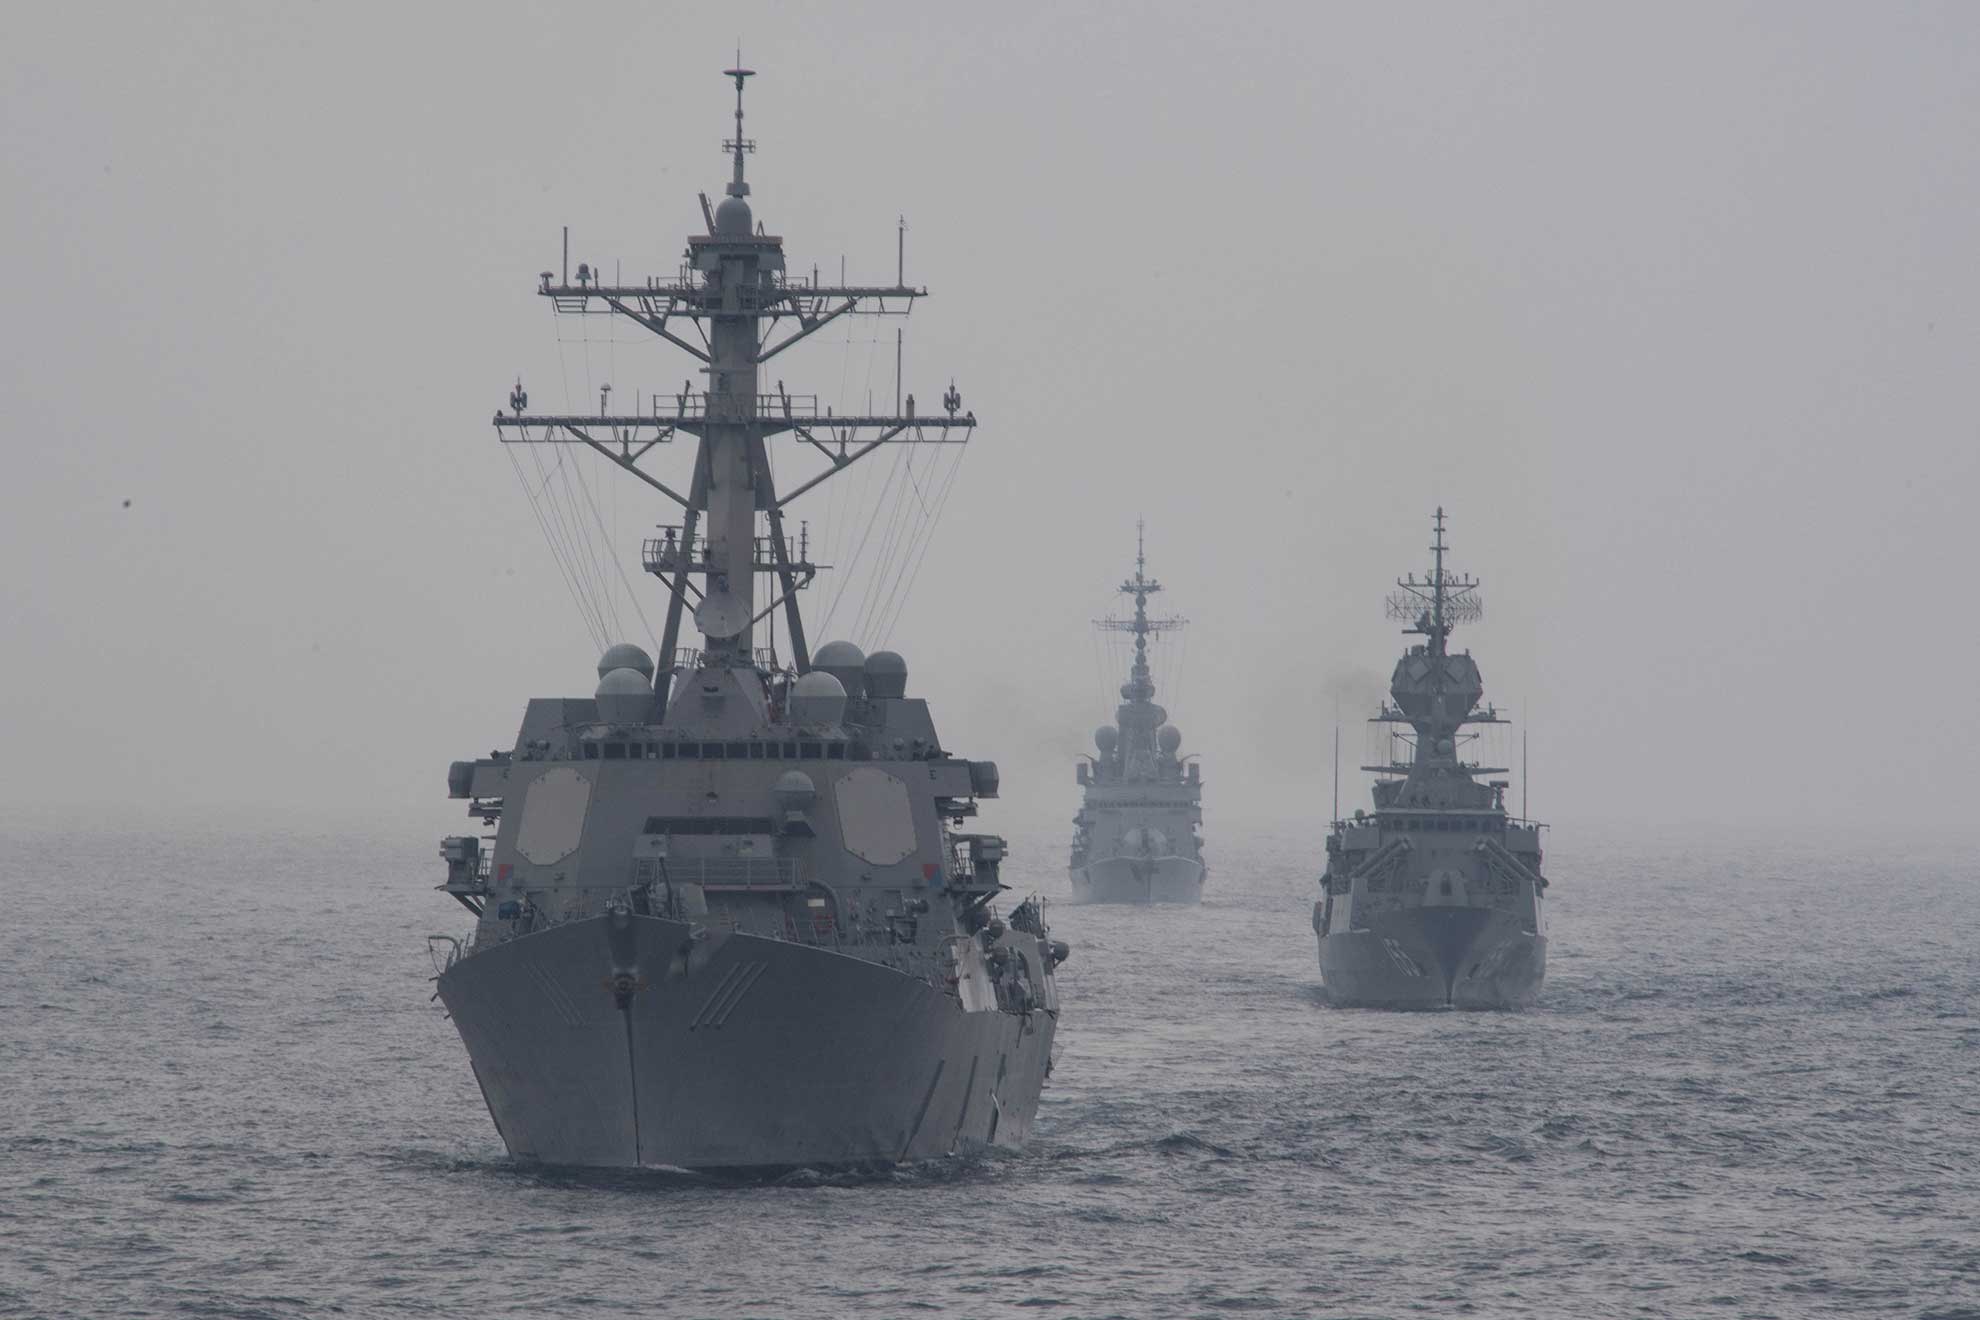 Arabian Sea (Dec. 14, 2018) The U.S. Navy guided-missile destroyer USS Spruance (DDG 111), left, the Royal Australian Navy Anzac-class frigate HMAS Ballarat (FFH 155), and the French navy F70AA-class air defense destroyer FS Cassard (D 614) are underway during anti-submarine warfare exercise SHAREM 195 in the Arabian Sea, Dec. 14, 2018. Stockdale is deployed to the U.S. 5th Fleet area of operations in support of naval operations to ensure maritime stability and security in the Central Region, connecting the Mediterranean and the Pacific through the western Indian Ocean and three strategic choke points -- U.S. Navy photo by MCS2 Abigayle Lutz -